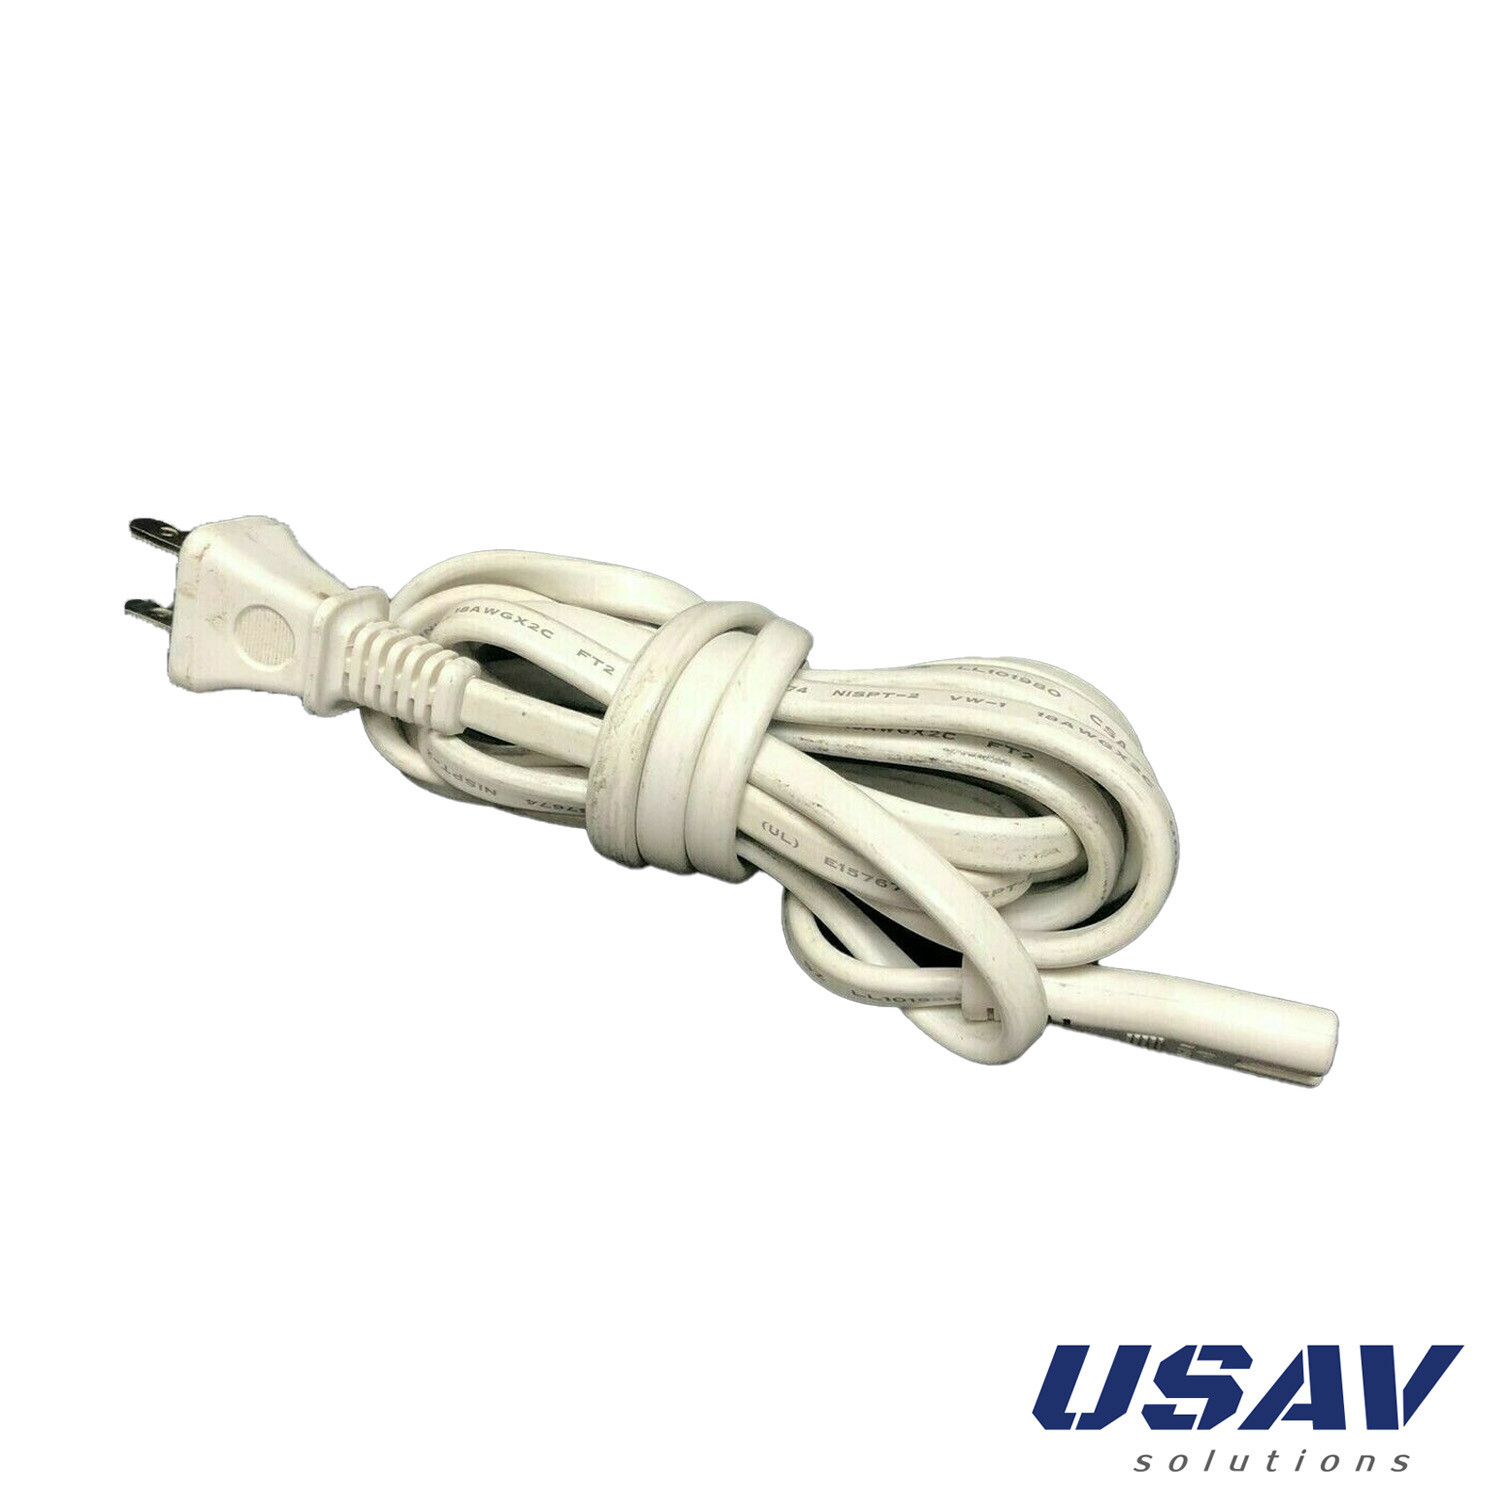 White Bose 2 Prong Power Cord for Bose Sounddock Series I II Power adapter